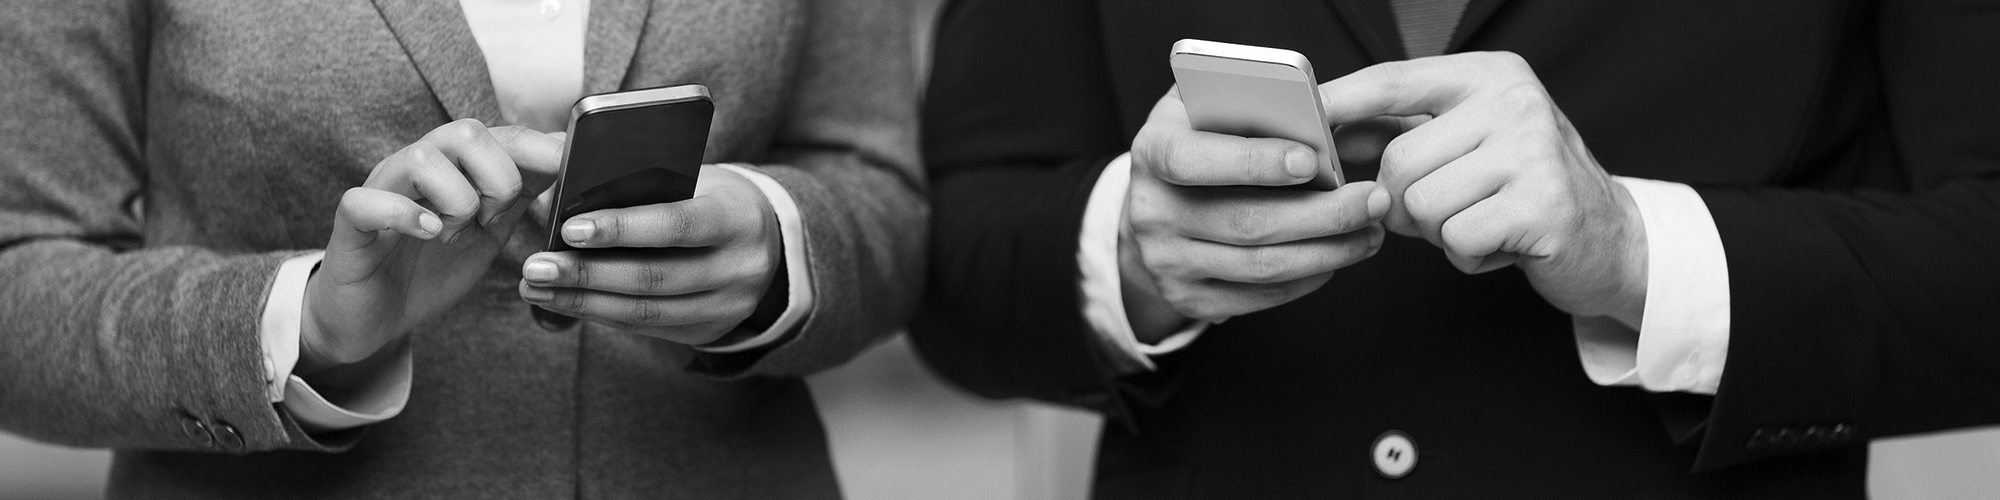 Image of two people's hands holding mobile phones